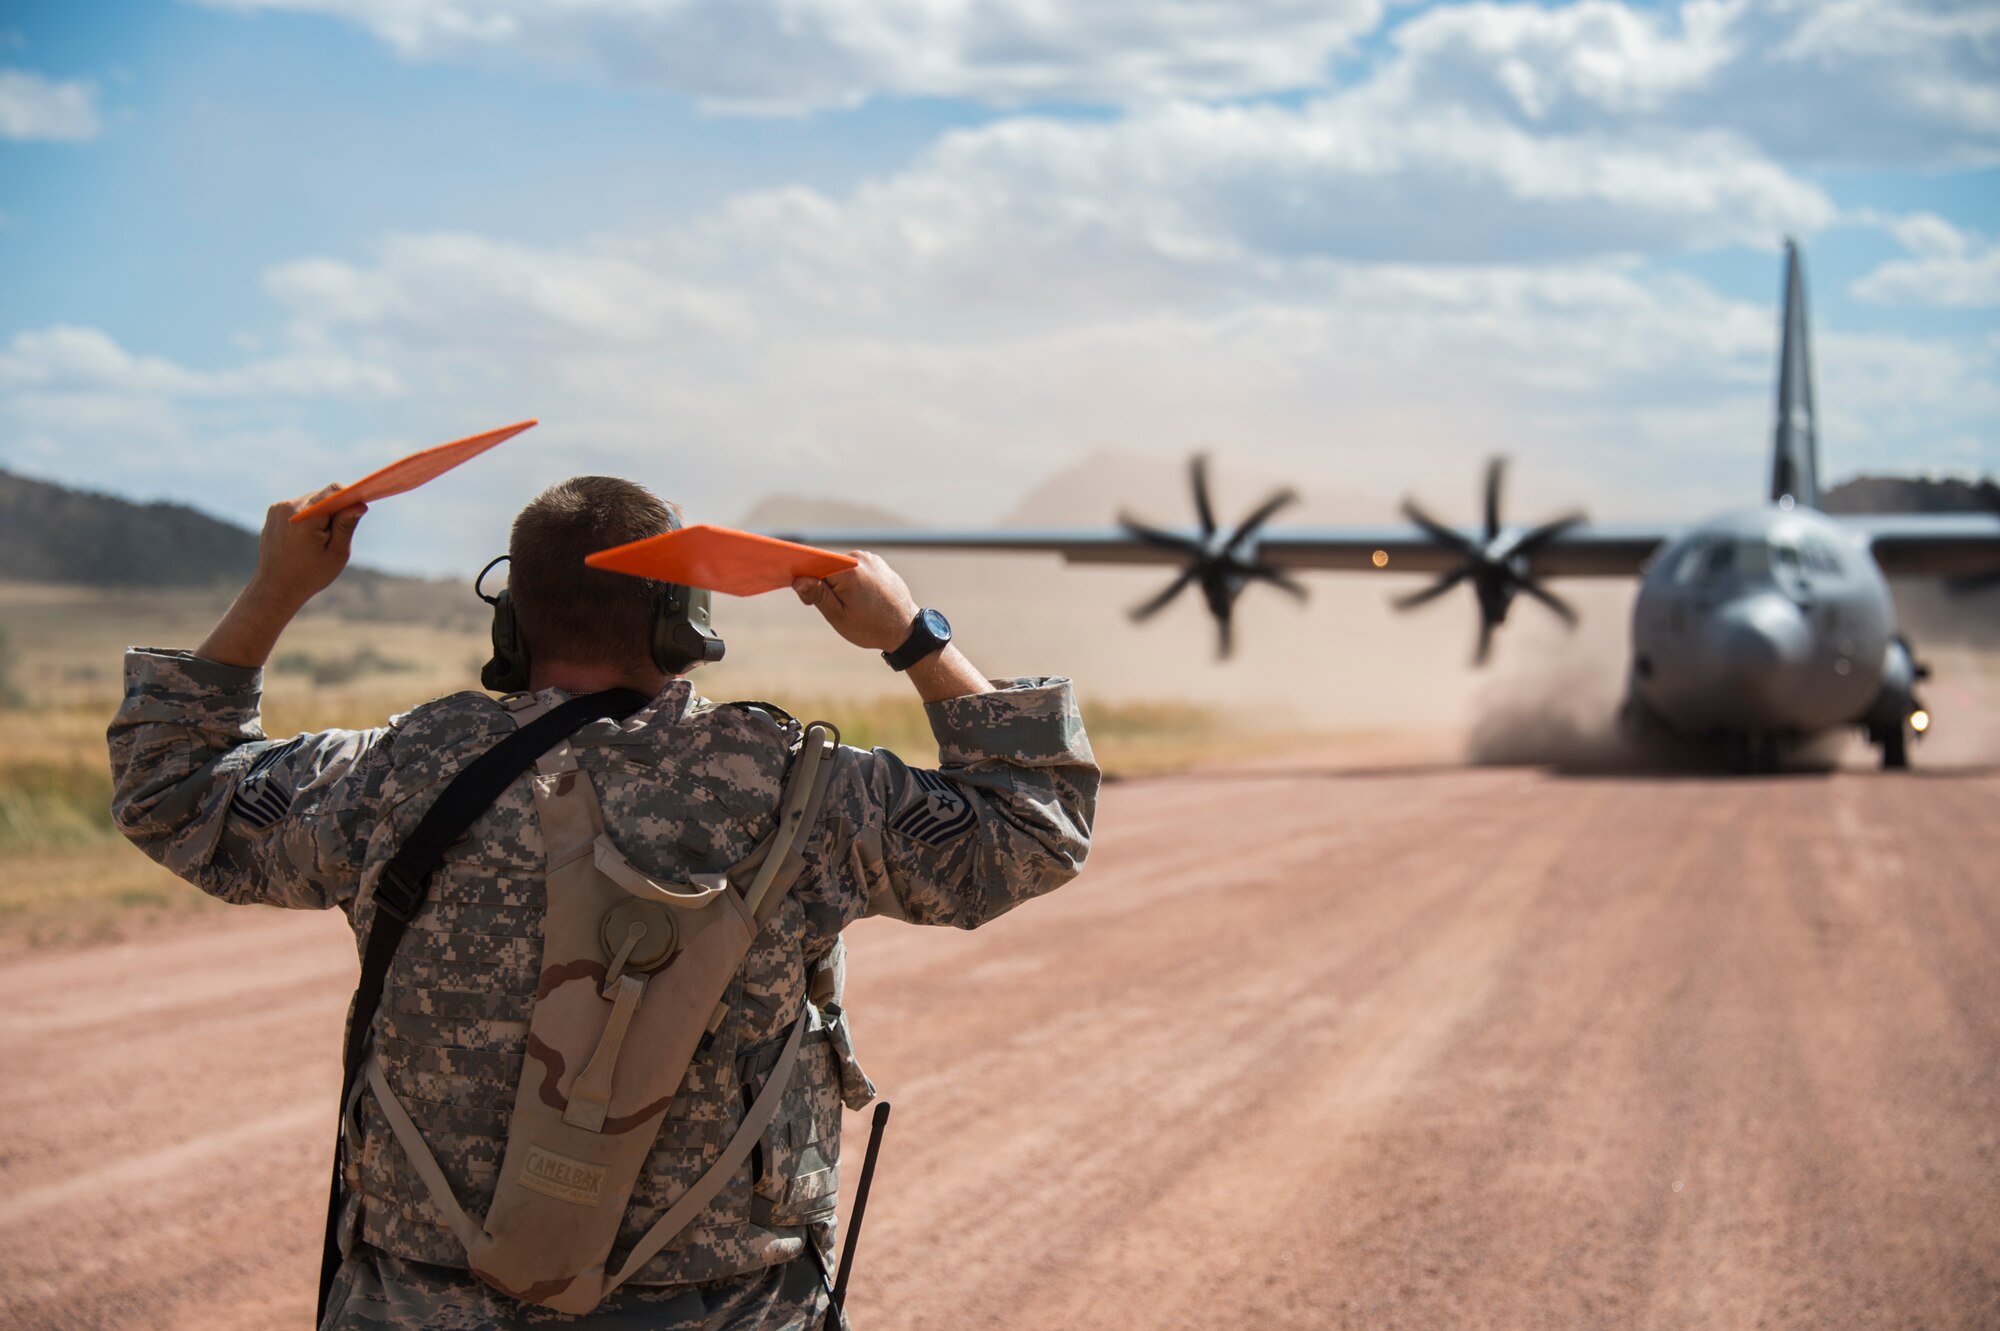 Tech Sgt. Ryan Padgett, a ramp coordinator for the 821st Contingency response Squadron from Travis Air Force Base, Calif., marshals in a C-130 Aircraft into parking area at Red Devil Landing Zone, Colo., on September 14, 2015. Approximately 150 Airmen from the 821st Contingency Response Group at Travis Air Force Base, Calif., participated in a first-of-its-kind Joint contingency response exercise from Sept. 8-19 at five locations (Southern California Logistics Airfield, Calif., Freedom Landing Zone, Calif., Gunnison Region Airfield, Colo., Red Devil Landing Zone, Colo., Peterson Air Force Base, Colo., and Fort Carson, Colo.). During the training, 821st CRG Airmen supported more than 275 Soldiers from Fort Carson, Colo., during air drop missions, helicopter training, coordinated Apache air support, and personnel and equipment airlift training. The Contingency Response (CR) training was constructed to primarily develop unique CR-oriented training objectives to improve down range effectiveness in preparation for real-world responses. (U.S. Air Force Photos by Tech. Sgt. Matthew Hannen)